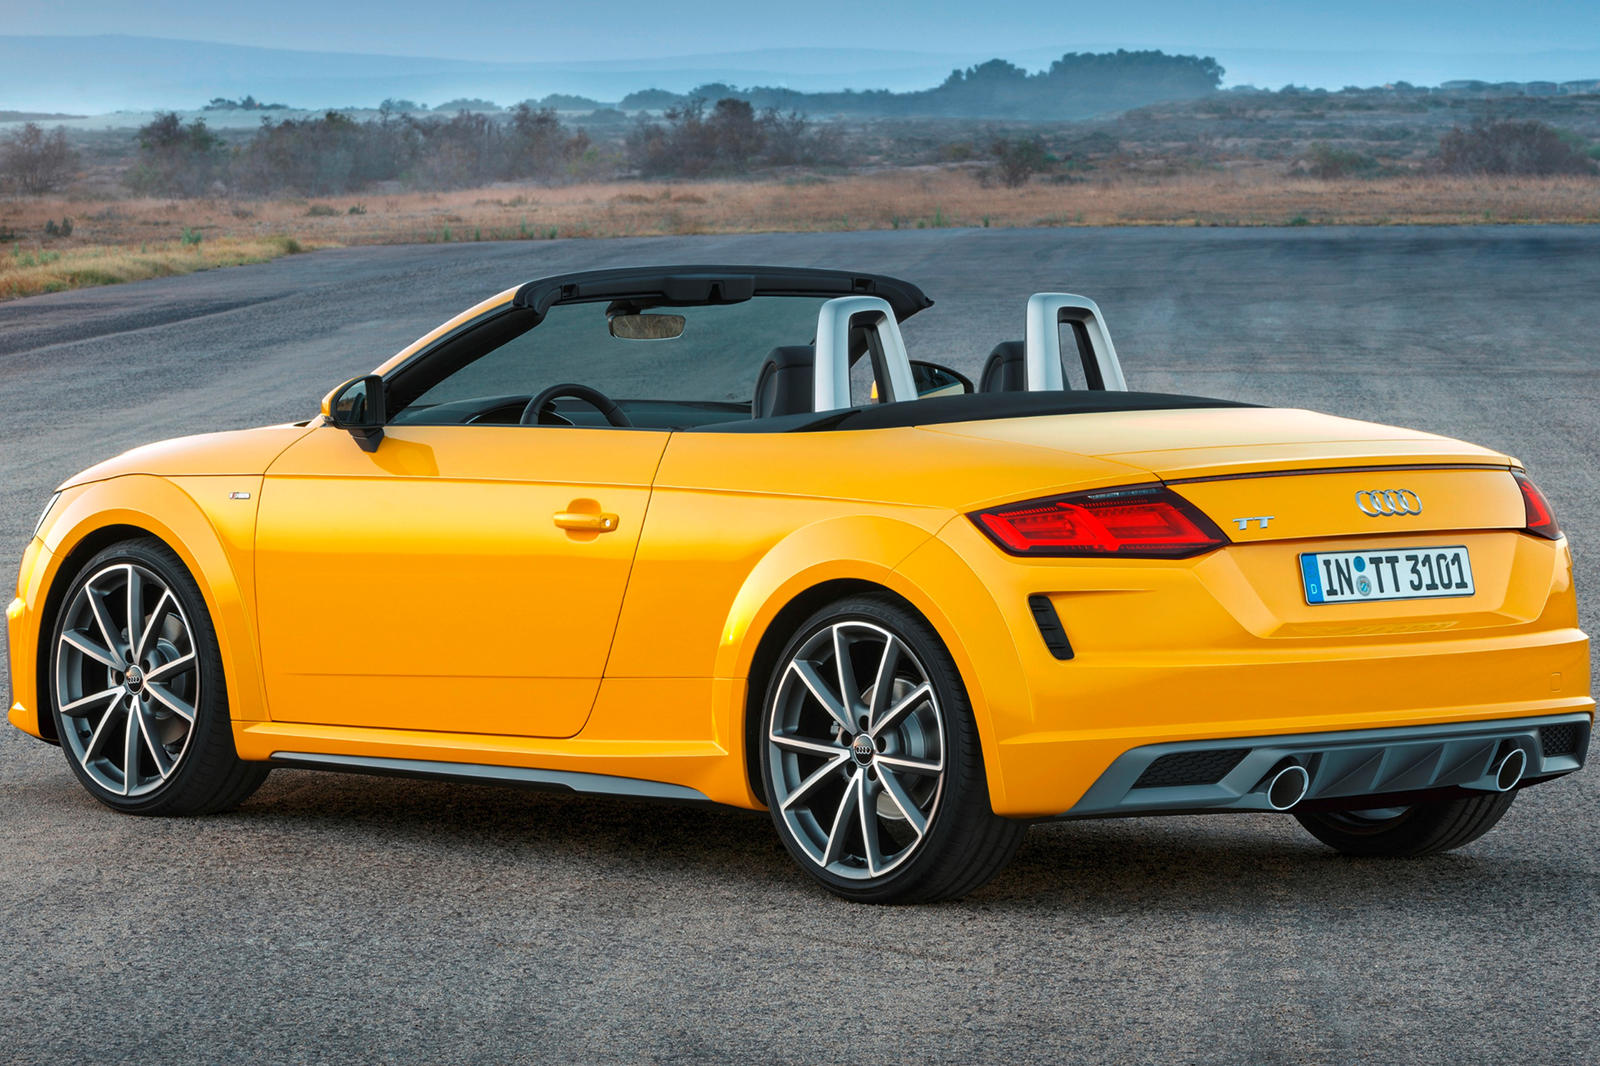 https://cdn.carbuzz.com/gallery-images/2023-audi-tt-roadster-rear-angle-view-carbuzz-611275-1600.jpg